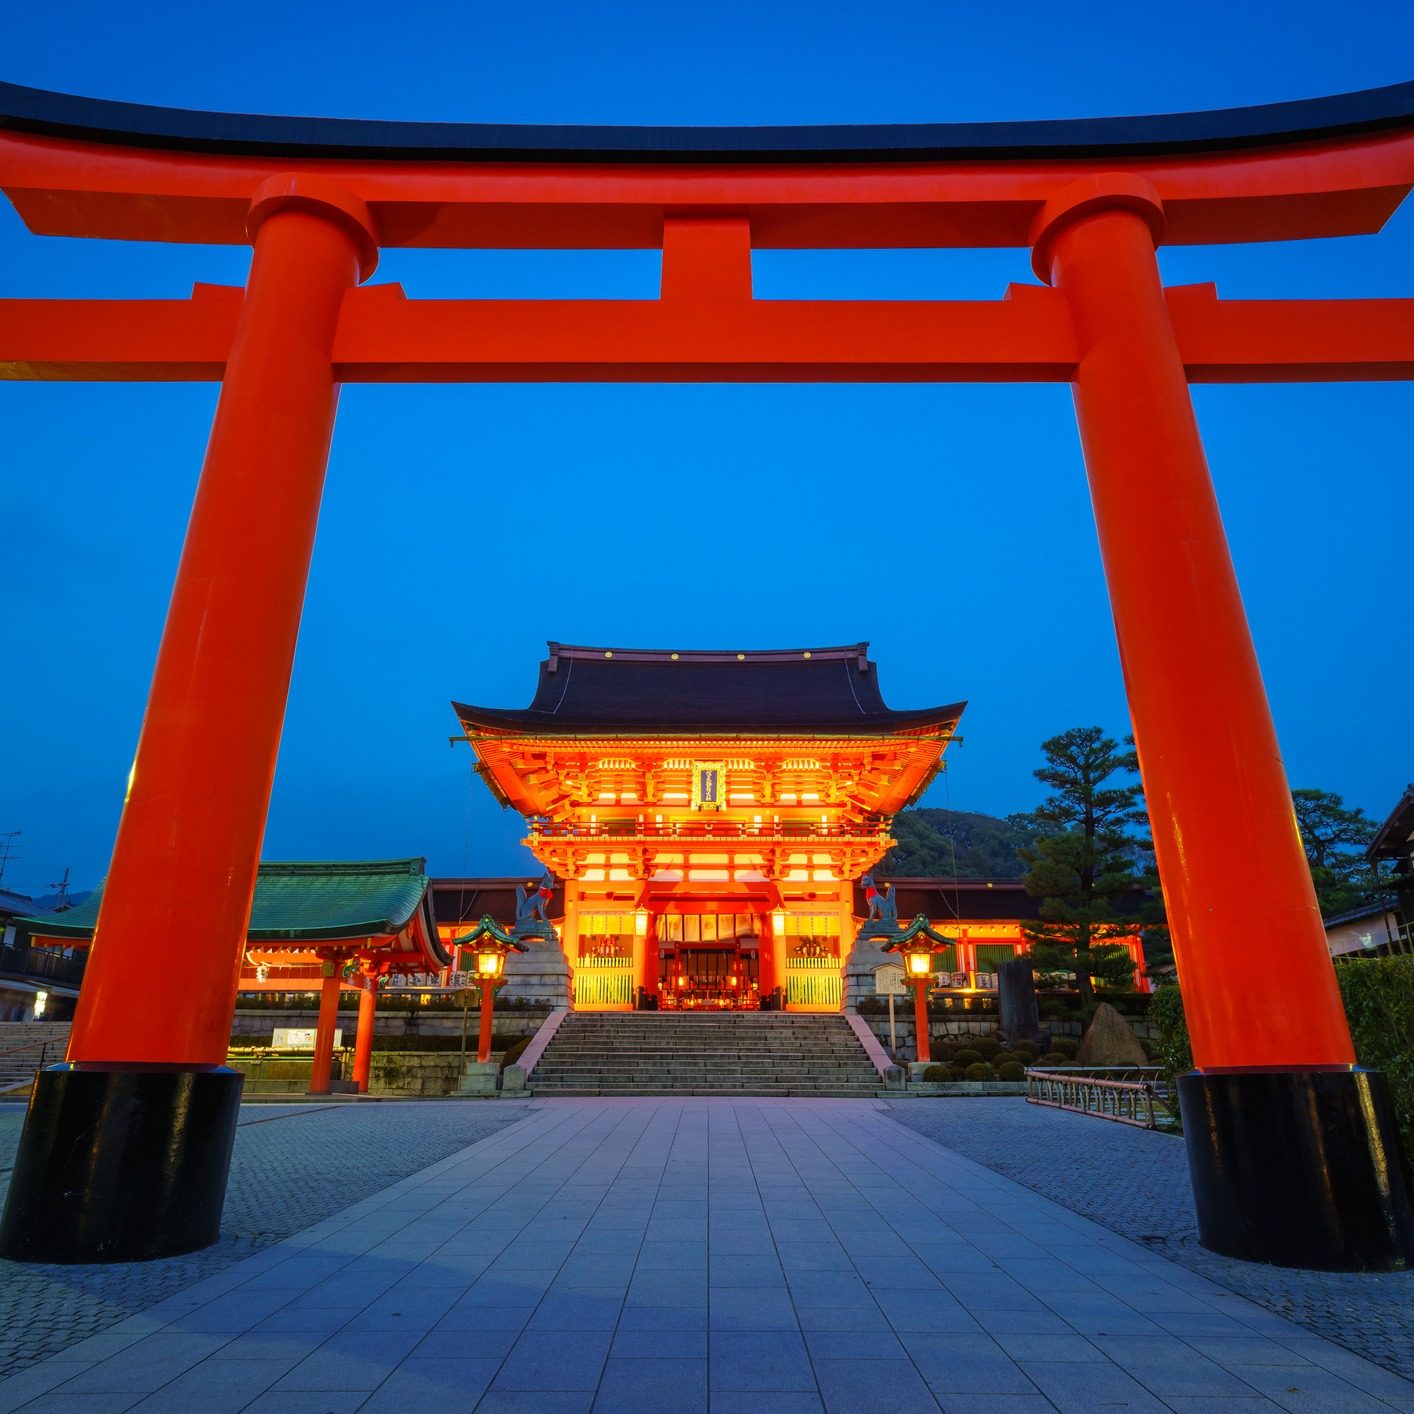 Kyoto, Japan - March 29, 2015: A Large torii gate at the entrance to the Fushimi Inari Shrine, was built in 711.